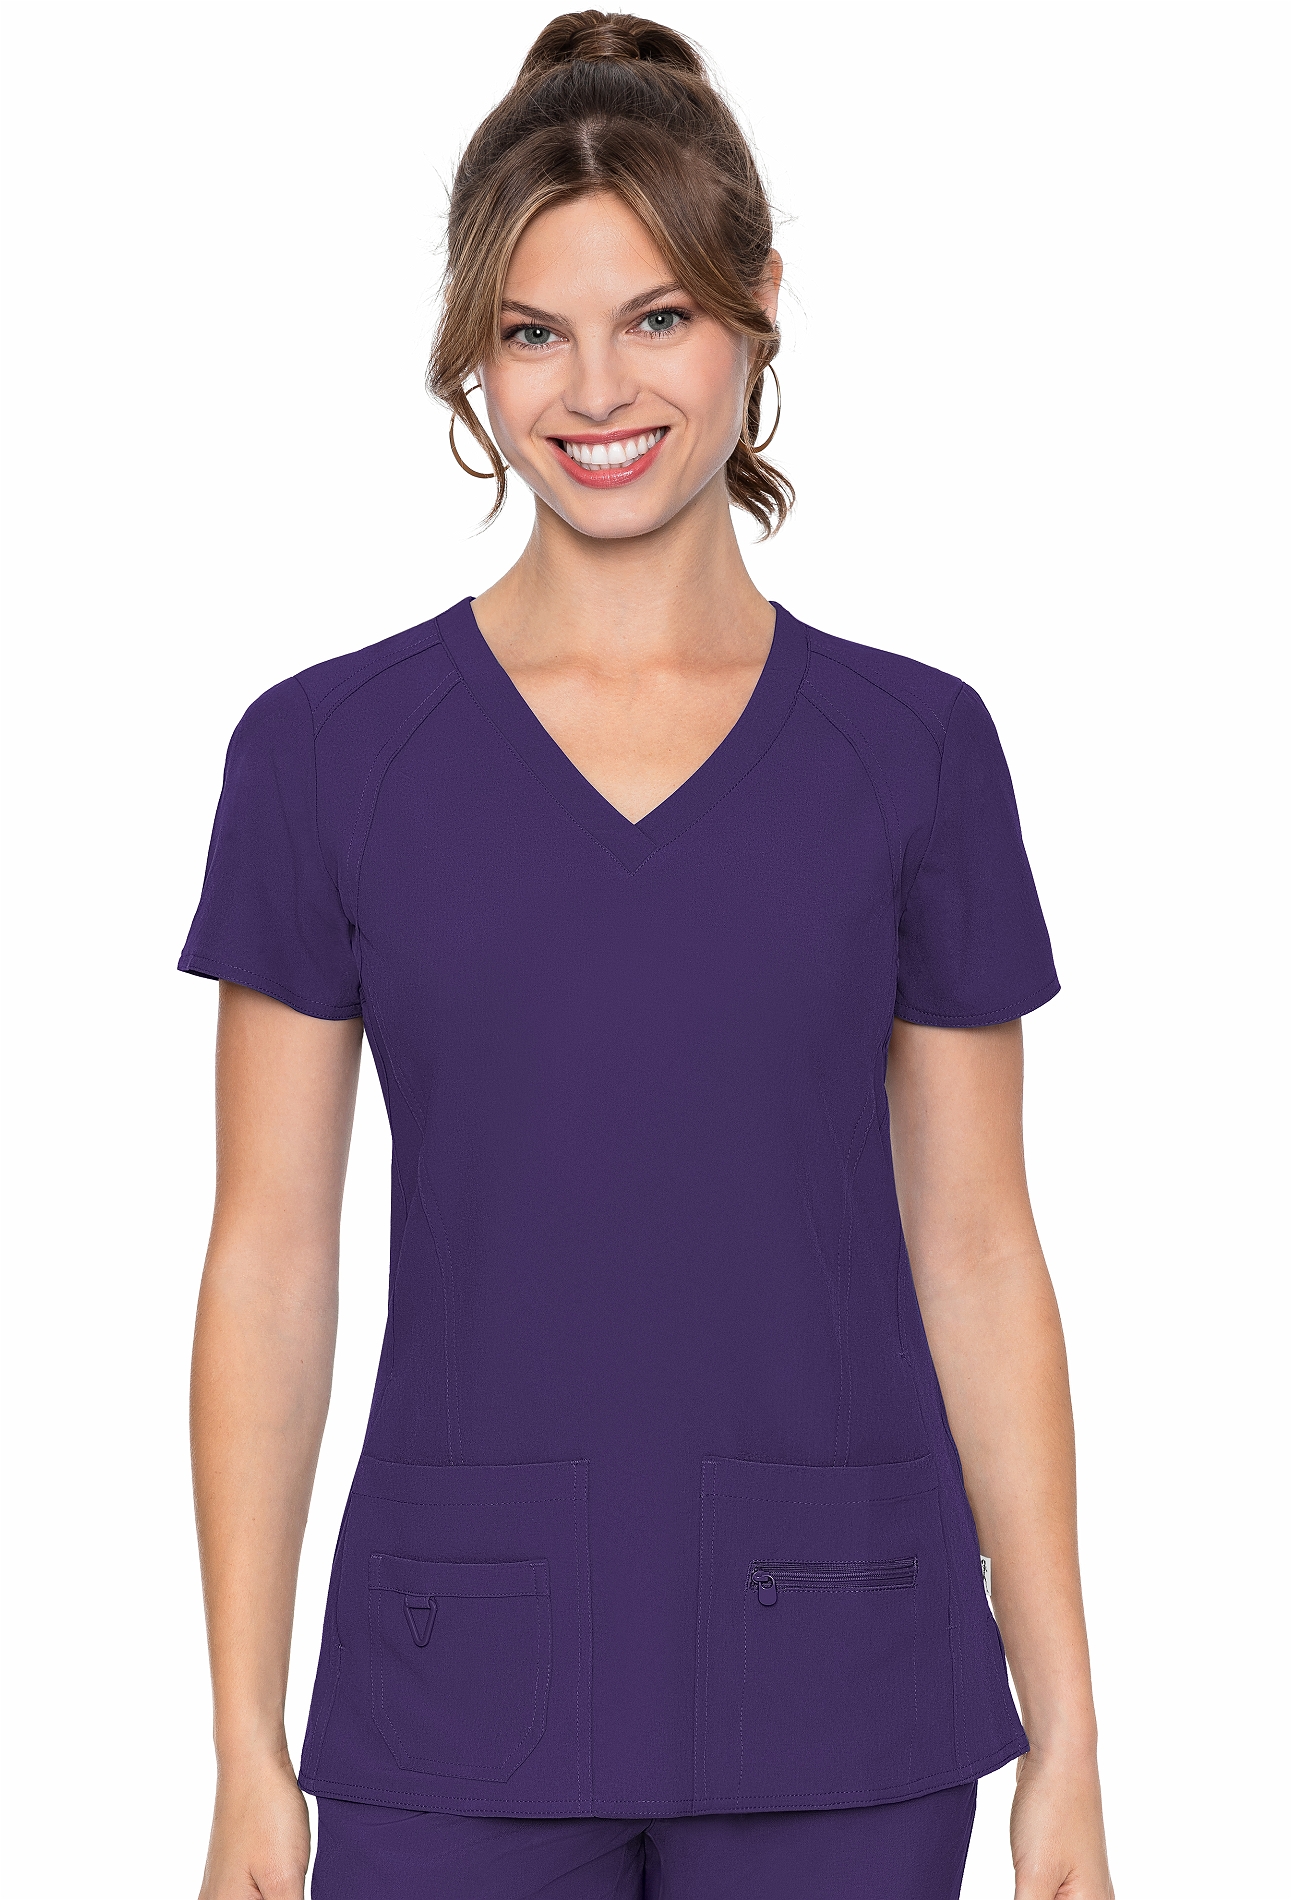 Med Couture Activate Refined Sport Knit Women&#39;s V-Neck Scrub Top-MC8416 (Plum - XX-Large)